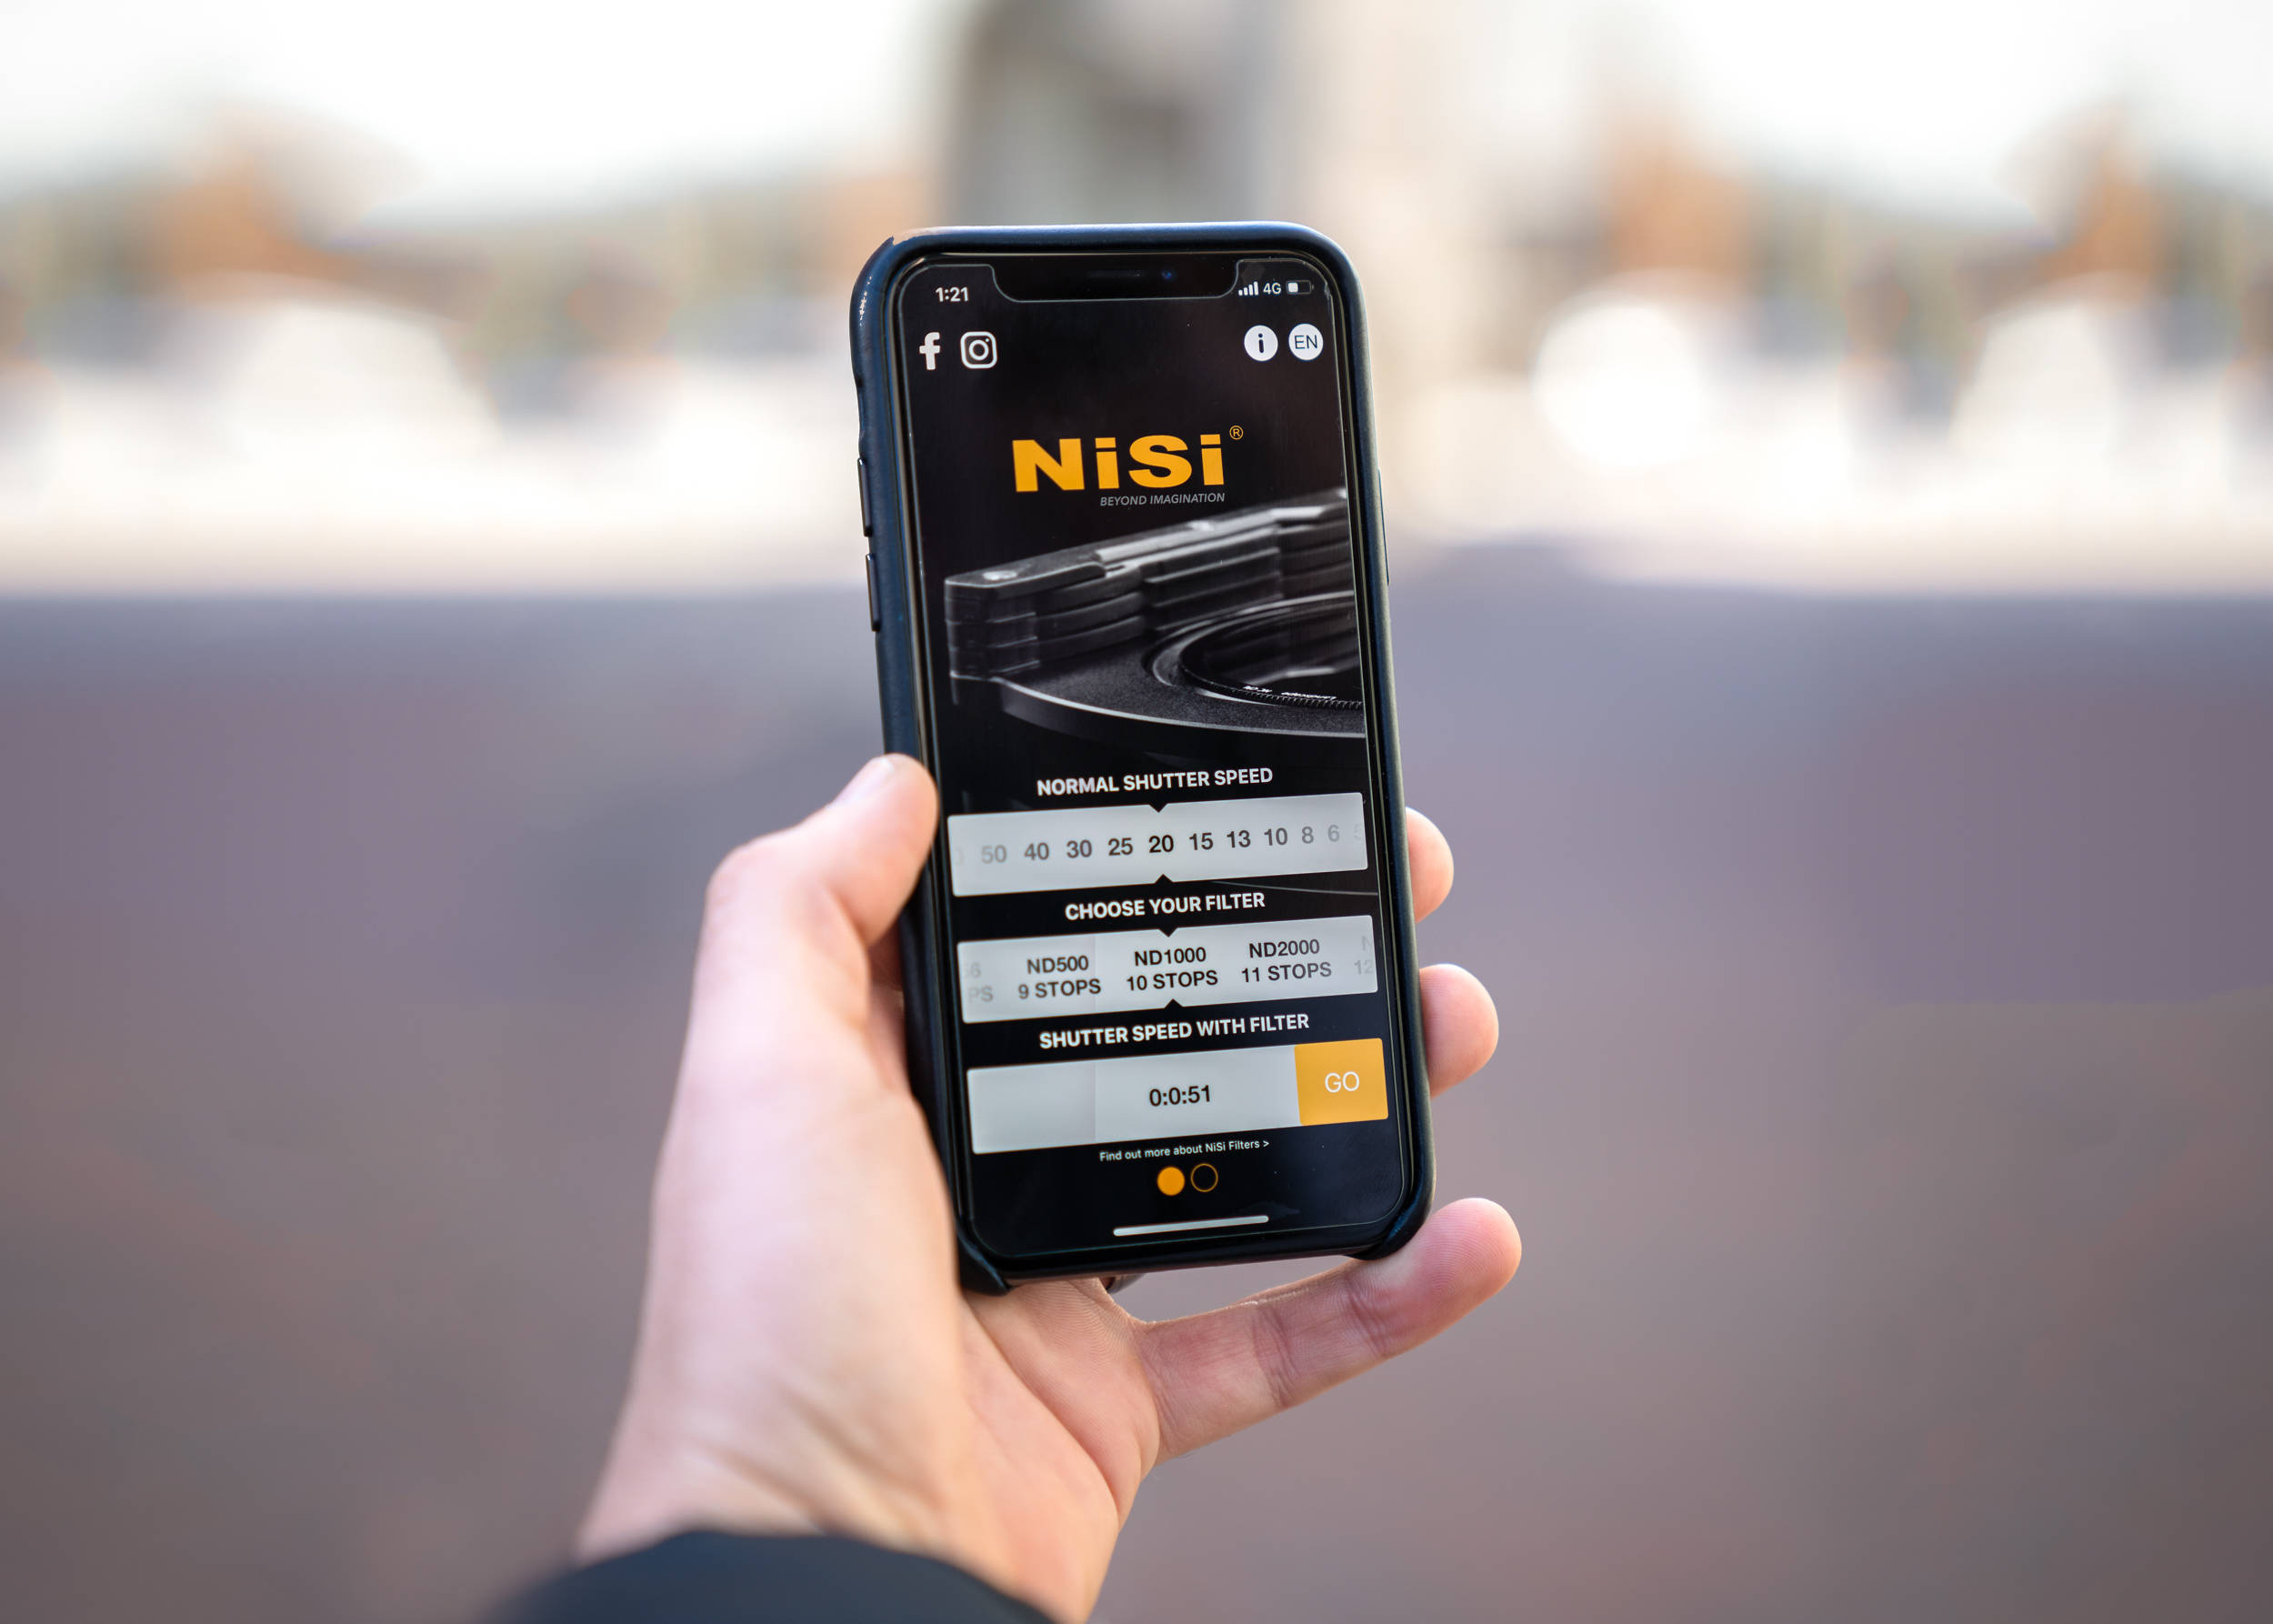 Calculating Exposure Times Using the NISi App